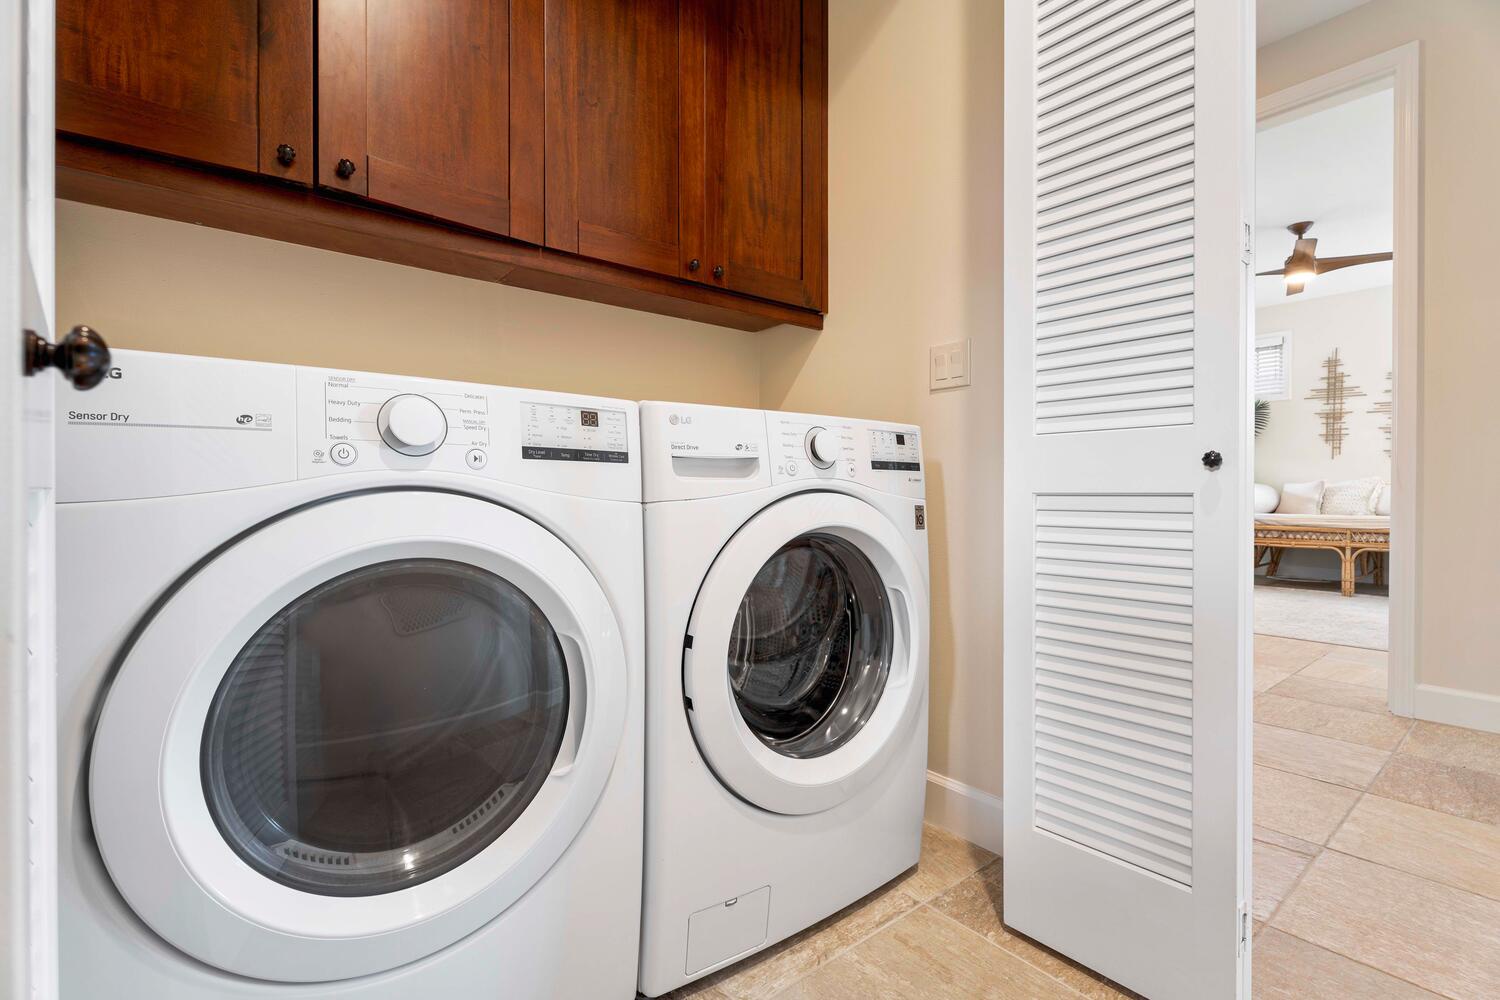 Kailua-Kona Vacation Rentals, Holua Kai #26 - Efficient and compact laundry room equipped with modern appliances and ample storage.